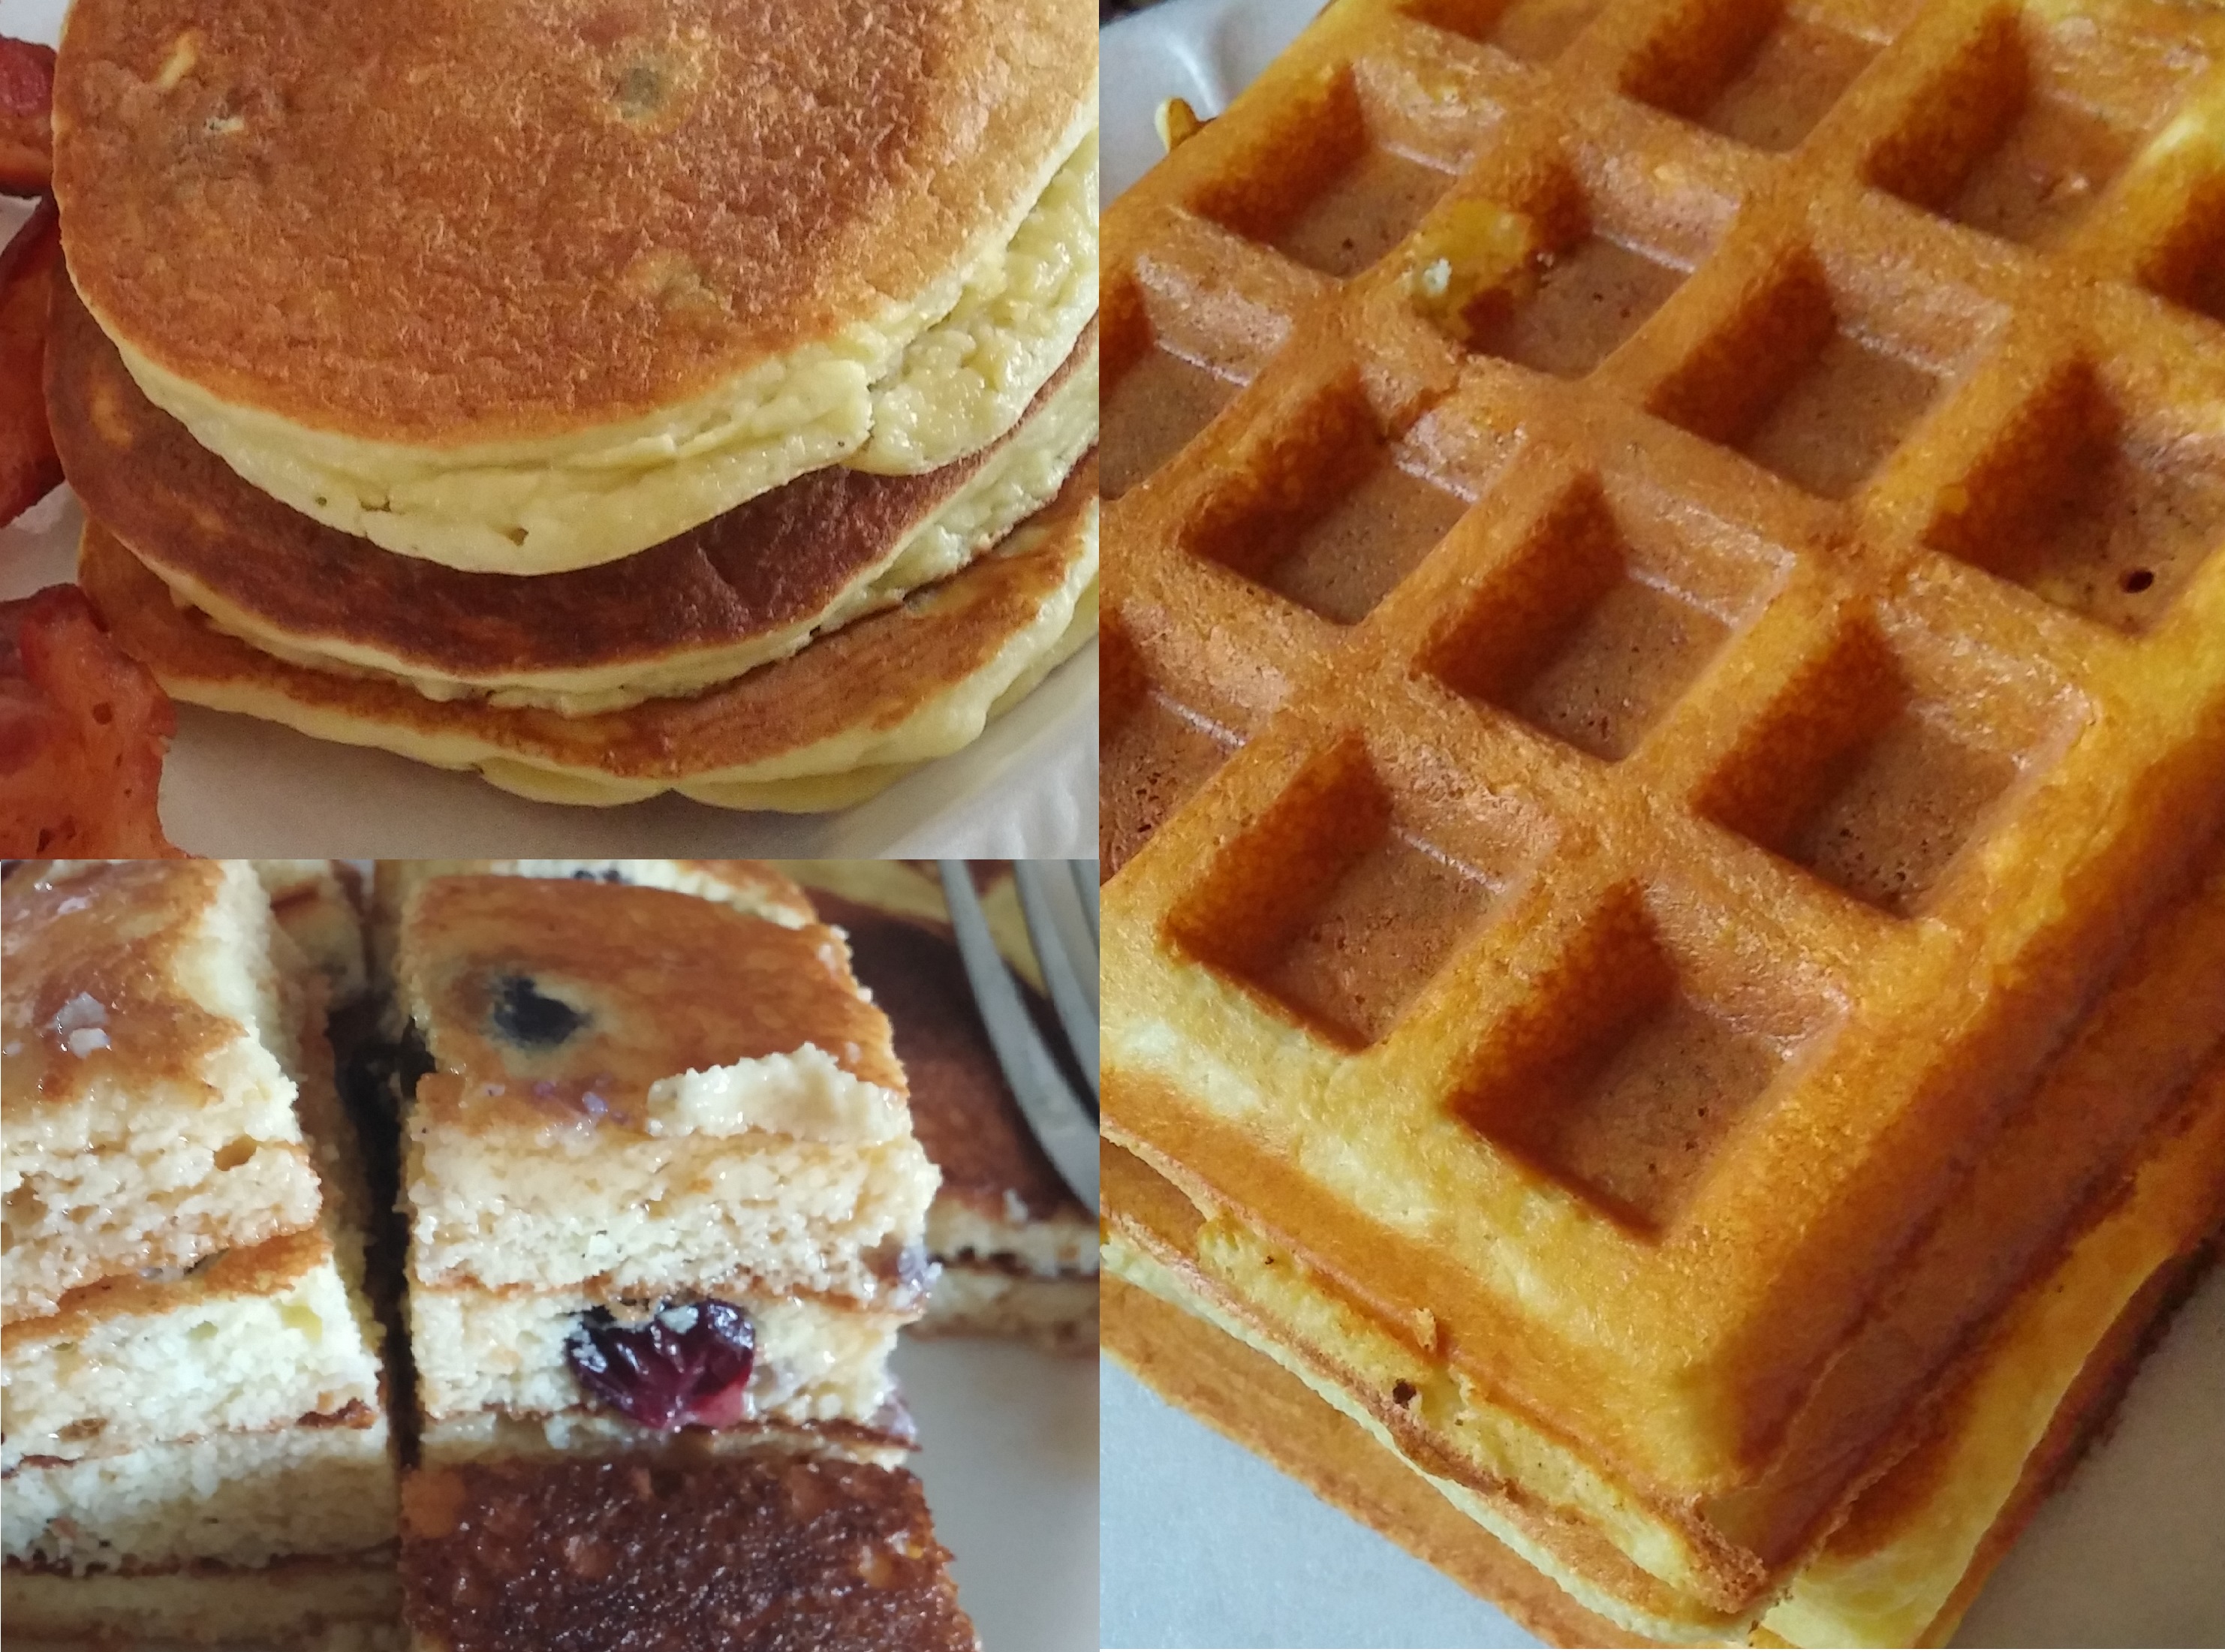 The Only Keto Pancake/Waffle Recipe I Need - TryKetoWith.Me